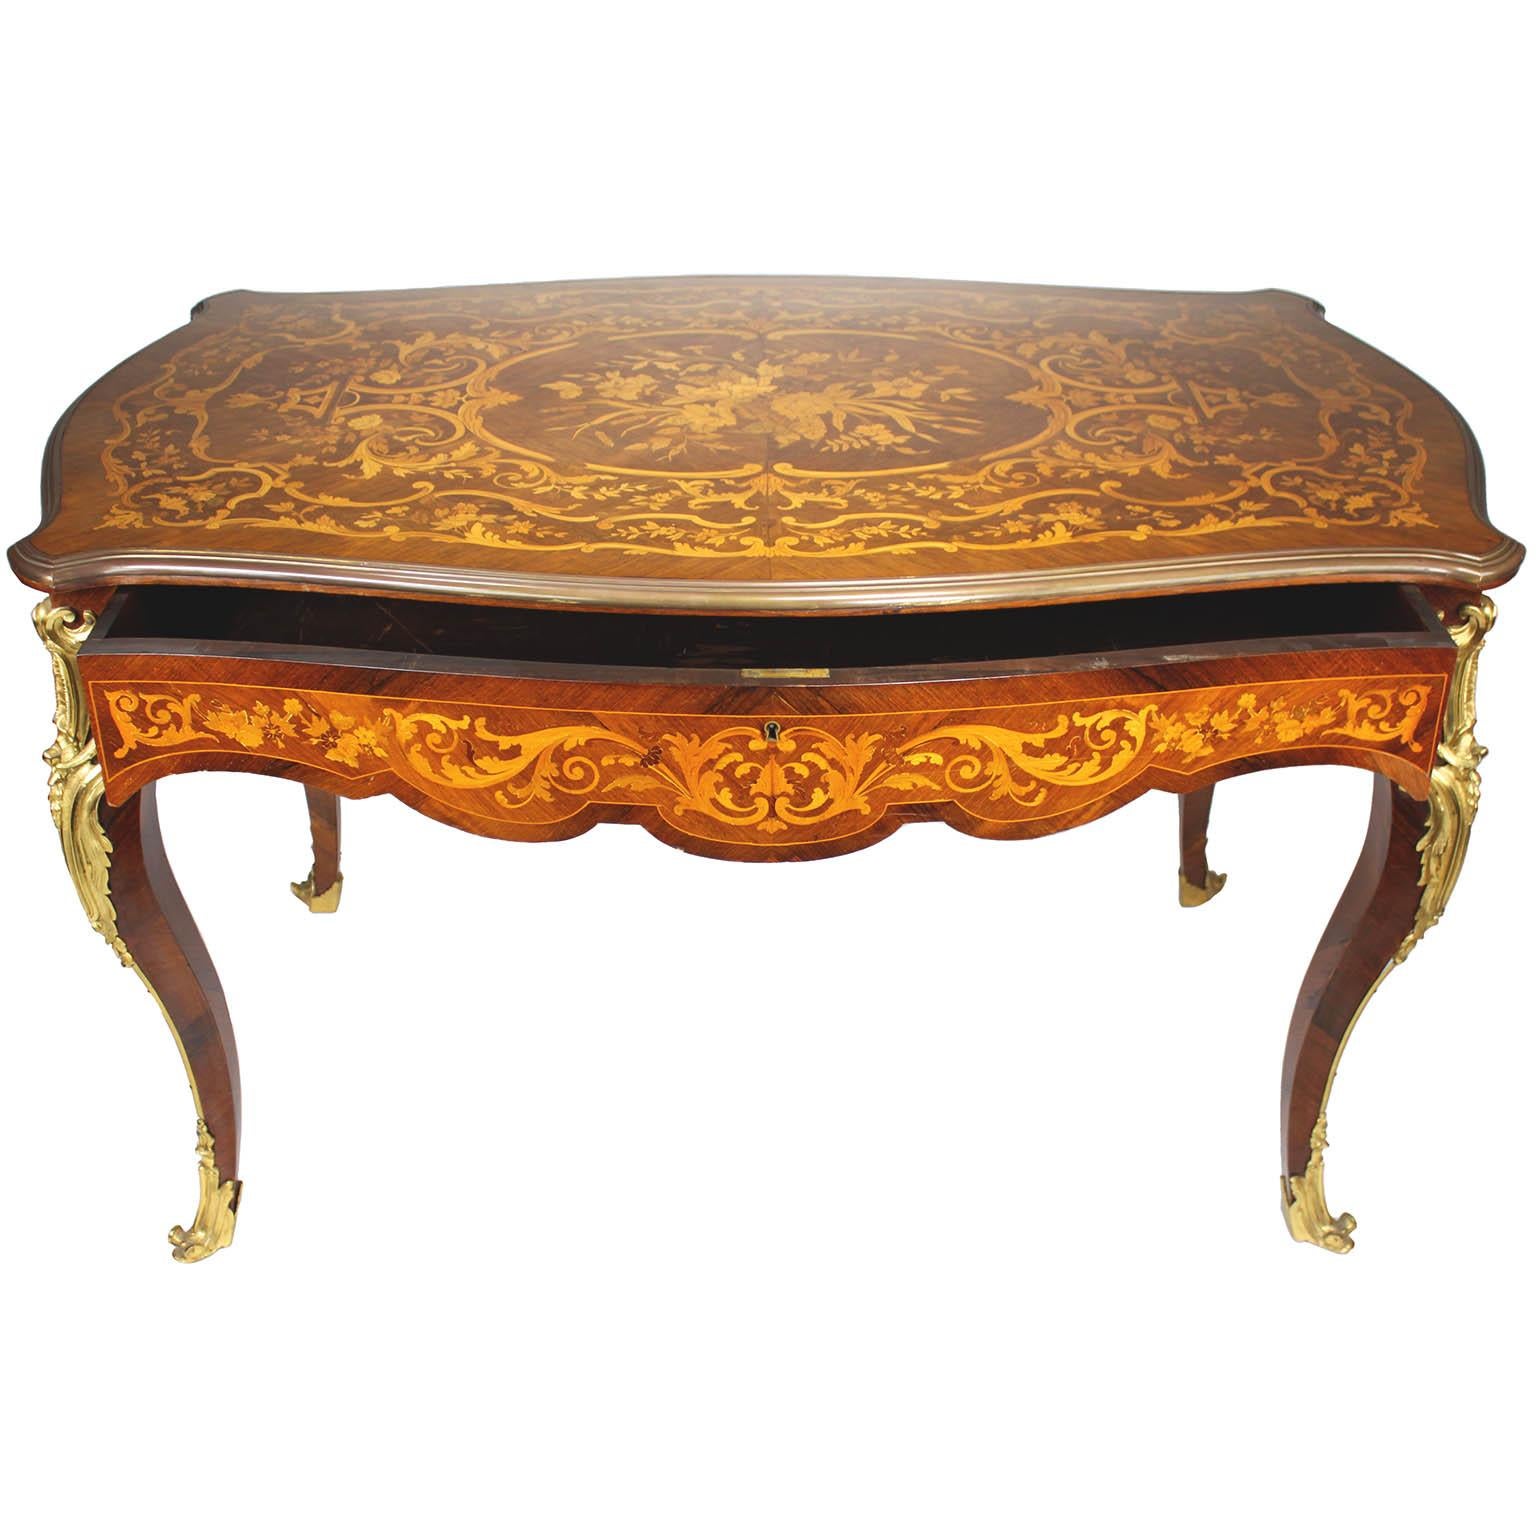 A French 19th/20th Century Louis XV Style Tulipwood Marquetry Writing Table/Desk In Good Condition For Sale In Los Angeles, CA